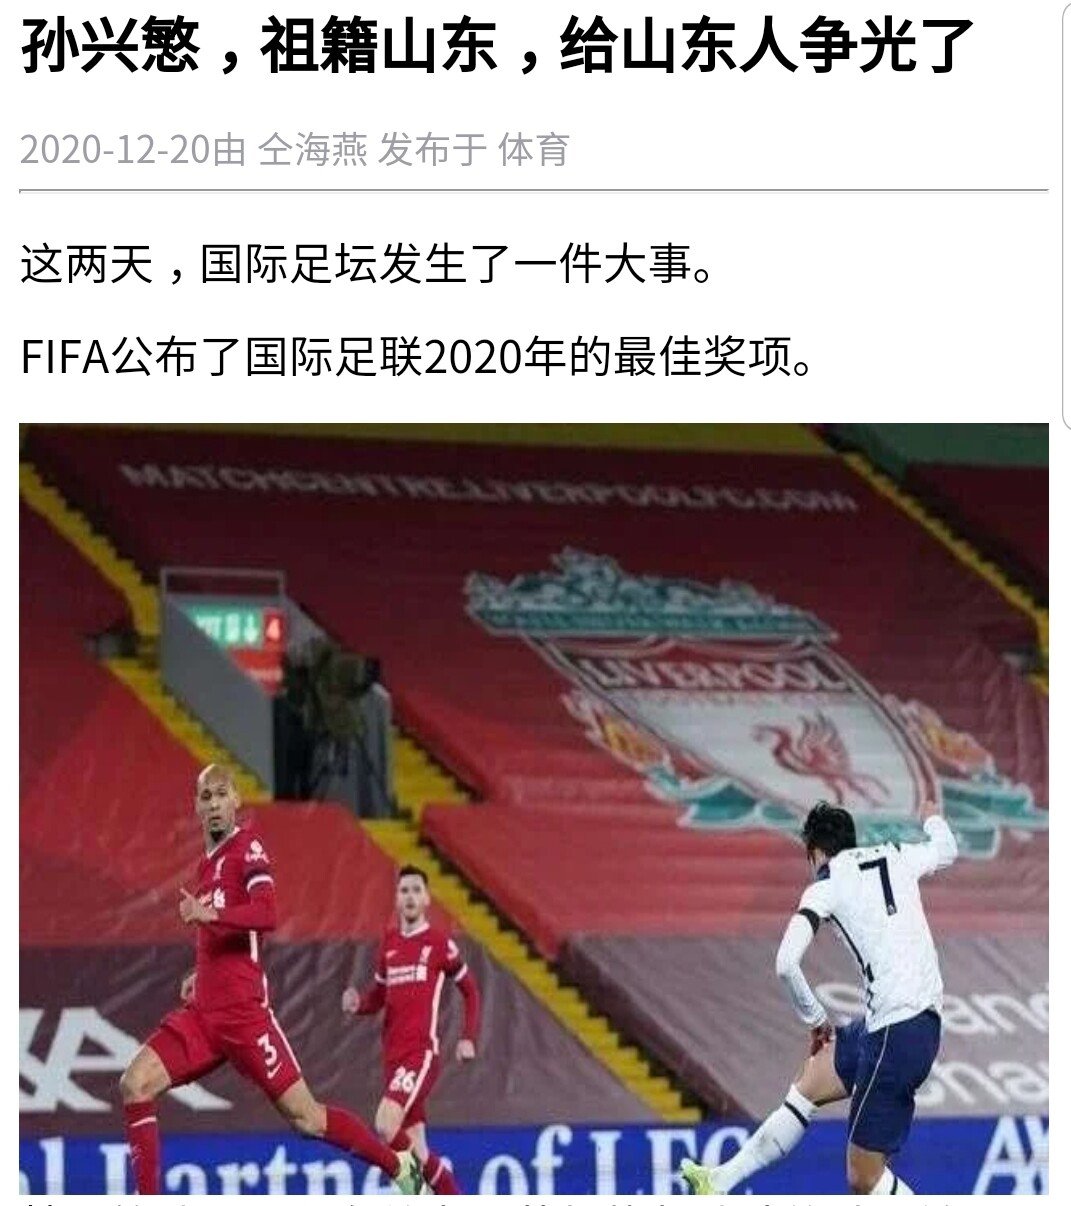 China: Son Heung-min is a descendant of Shandong province and is clearly Chinese.